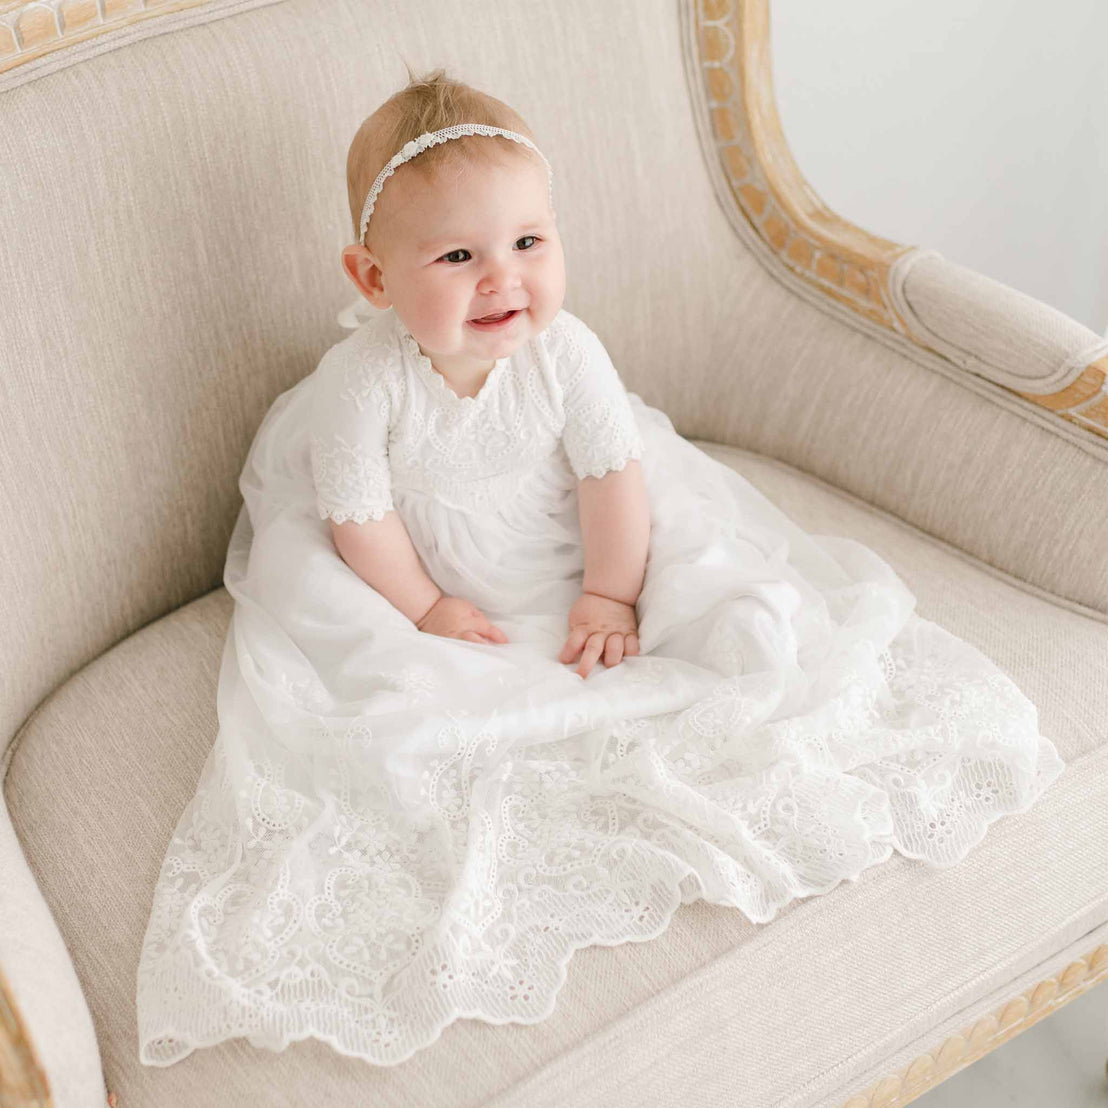 A joyful baby in an Eliza Blessing Gown & Bonnet, prepared for a christening, sits on an upscale beige vintage sofa, smiling broadly. The baby wears a delicate headband, enhancing a sweet, cheerful expression.